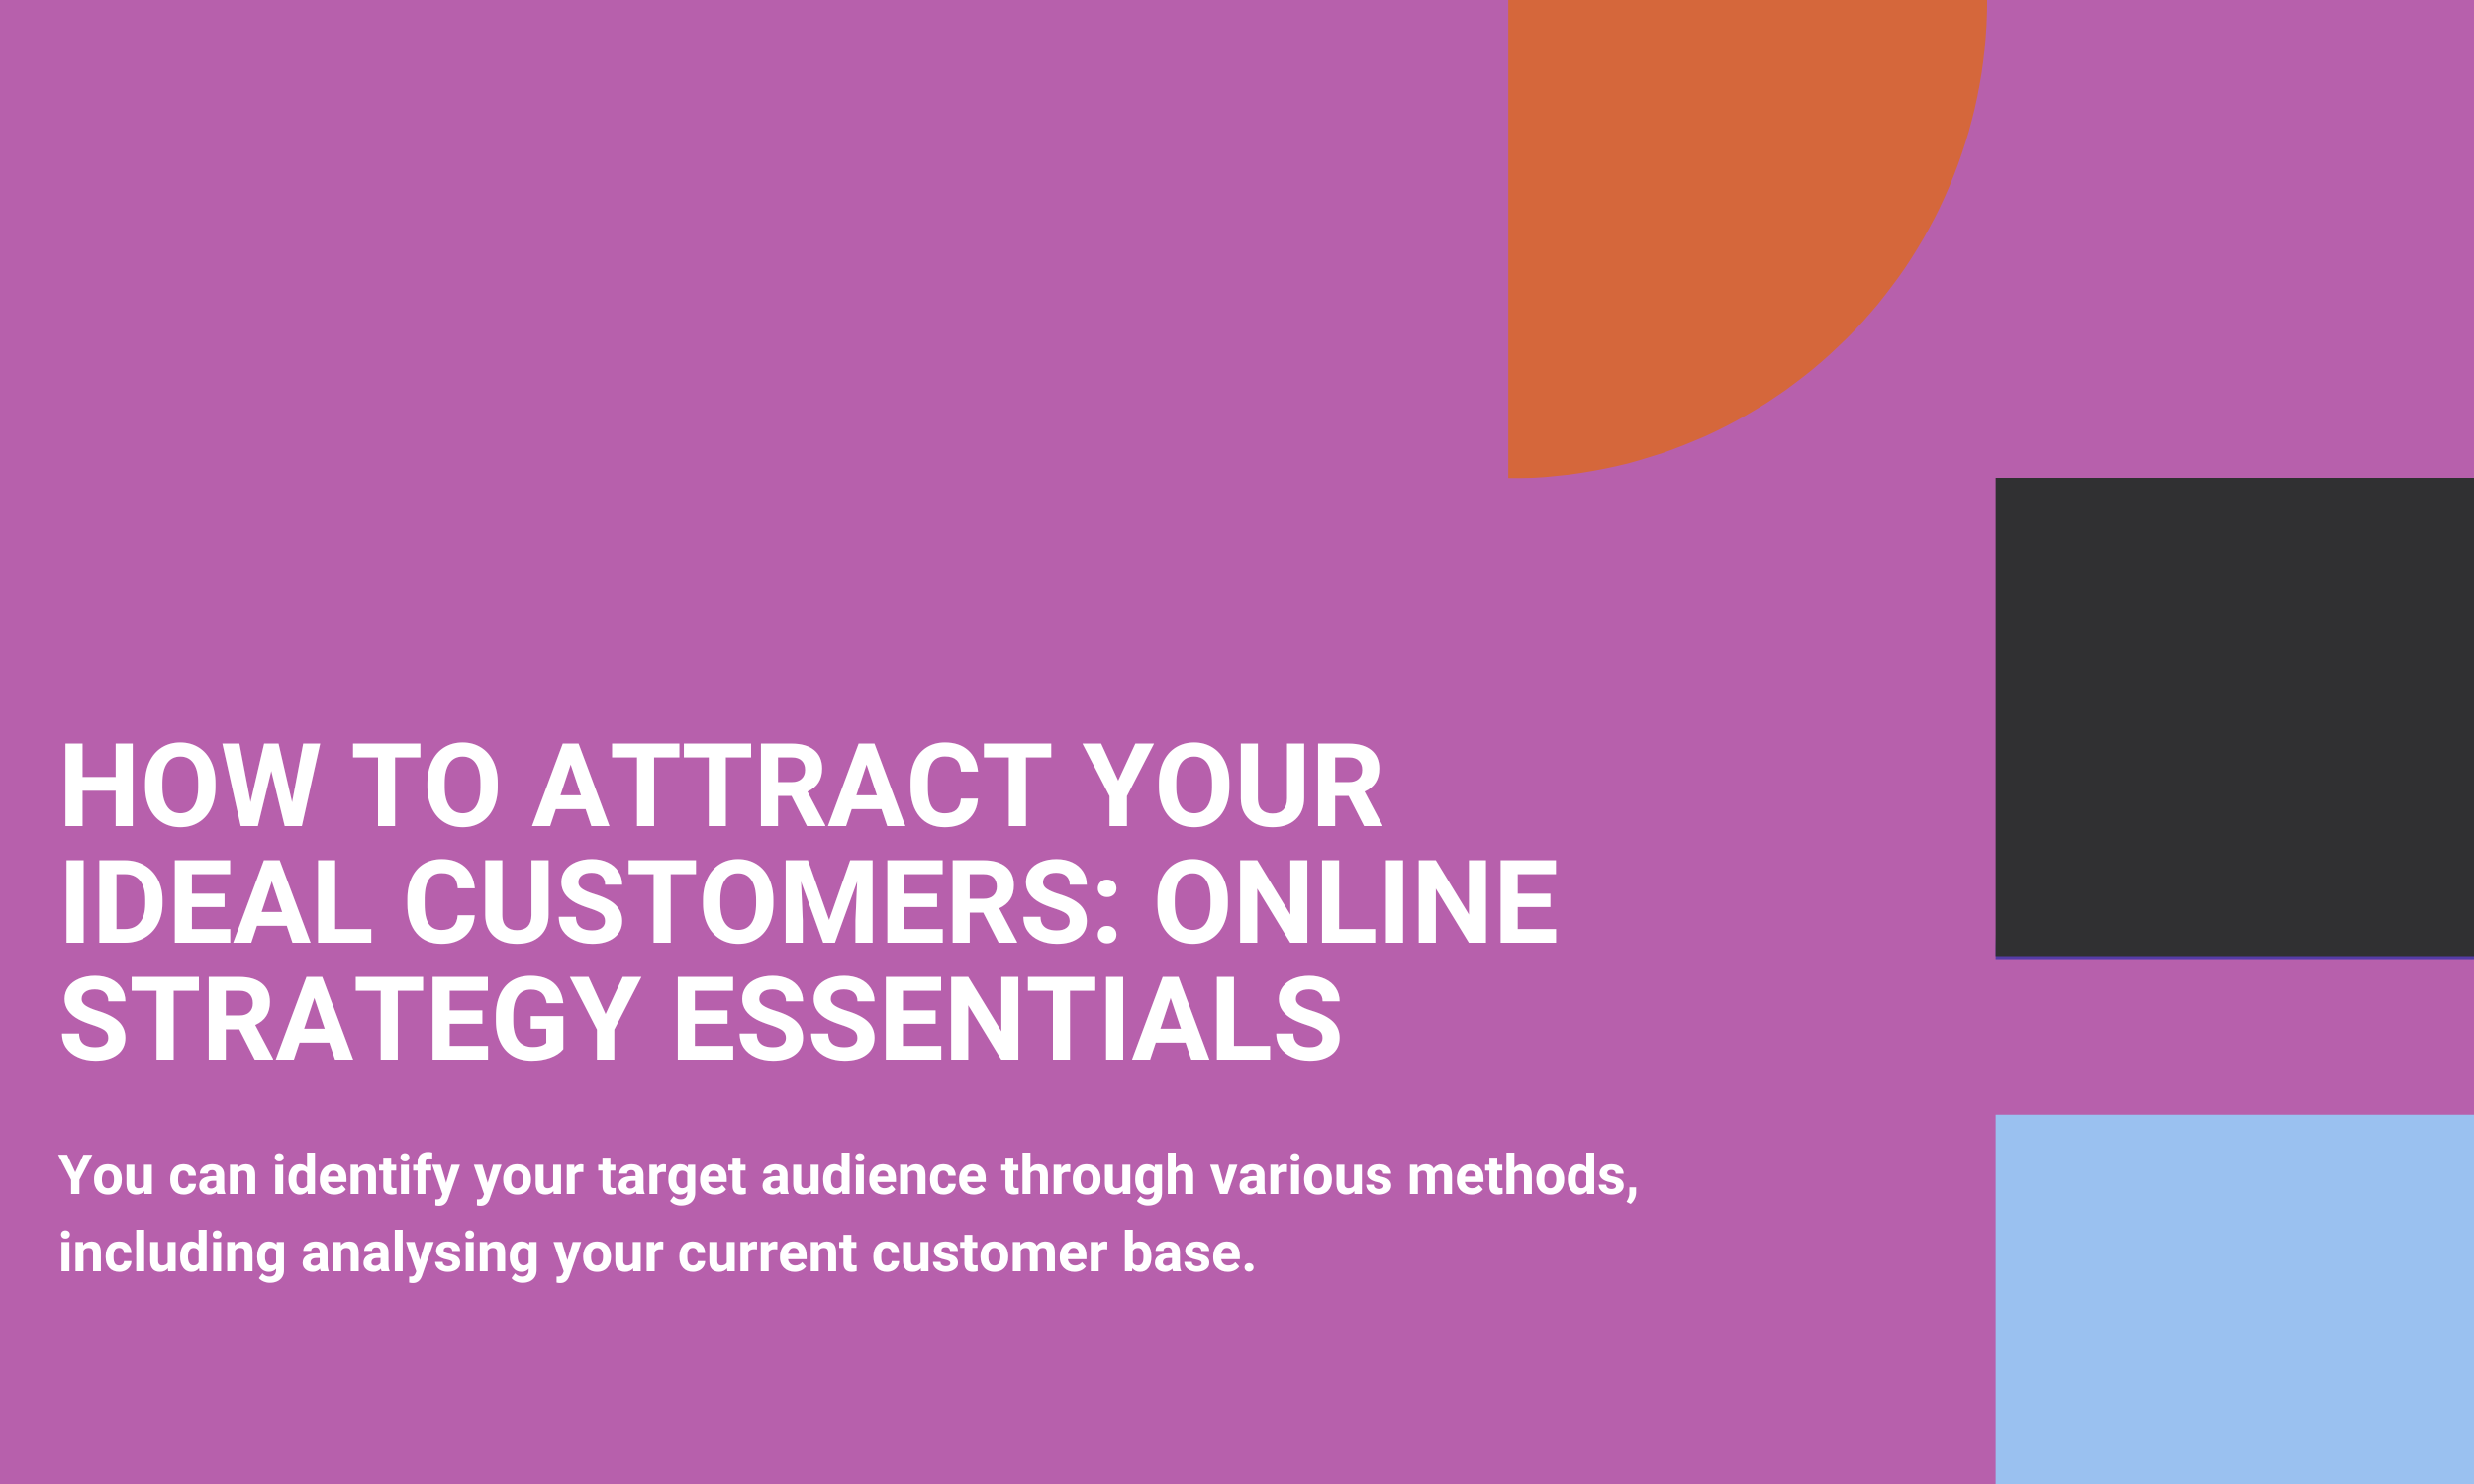 How To Attract Your Ideal Customers: Online Strategy Essentials